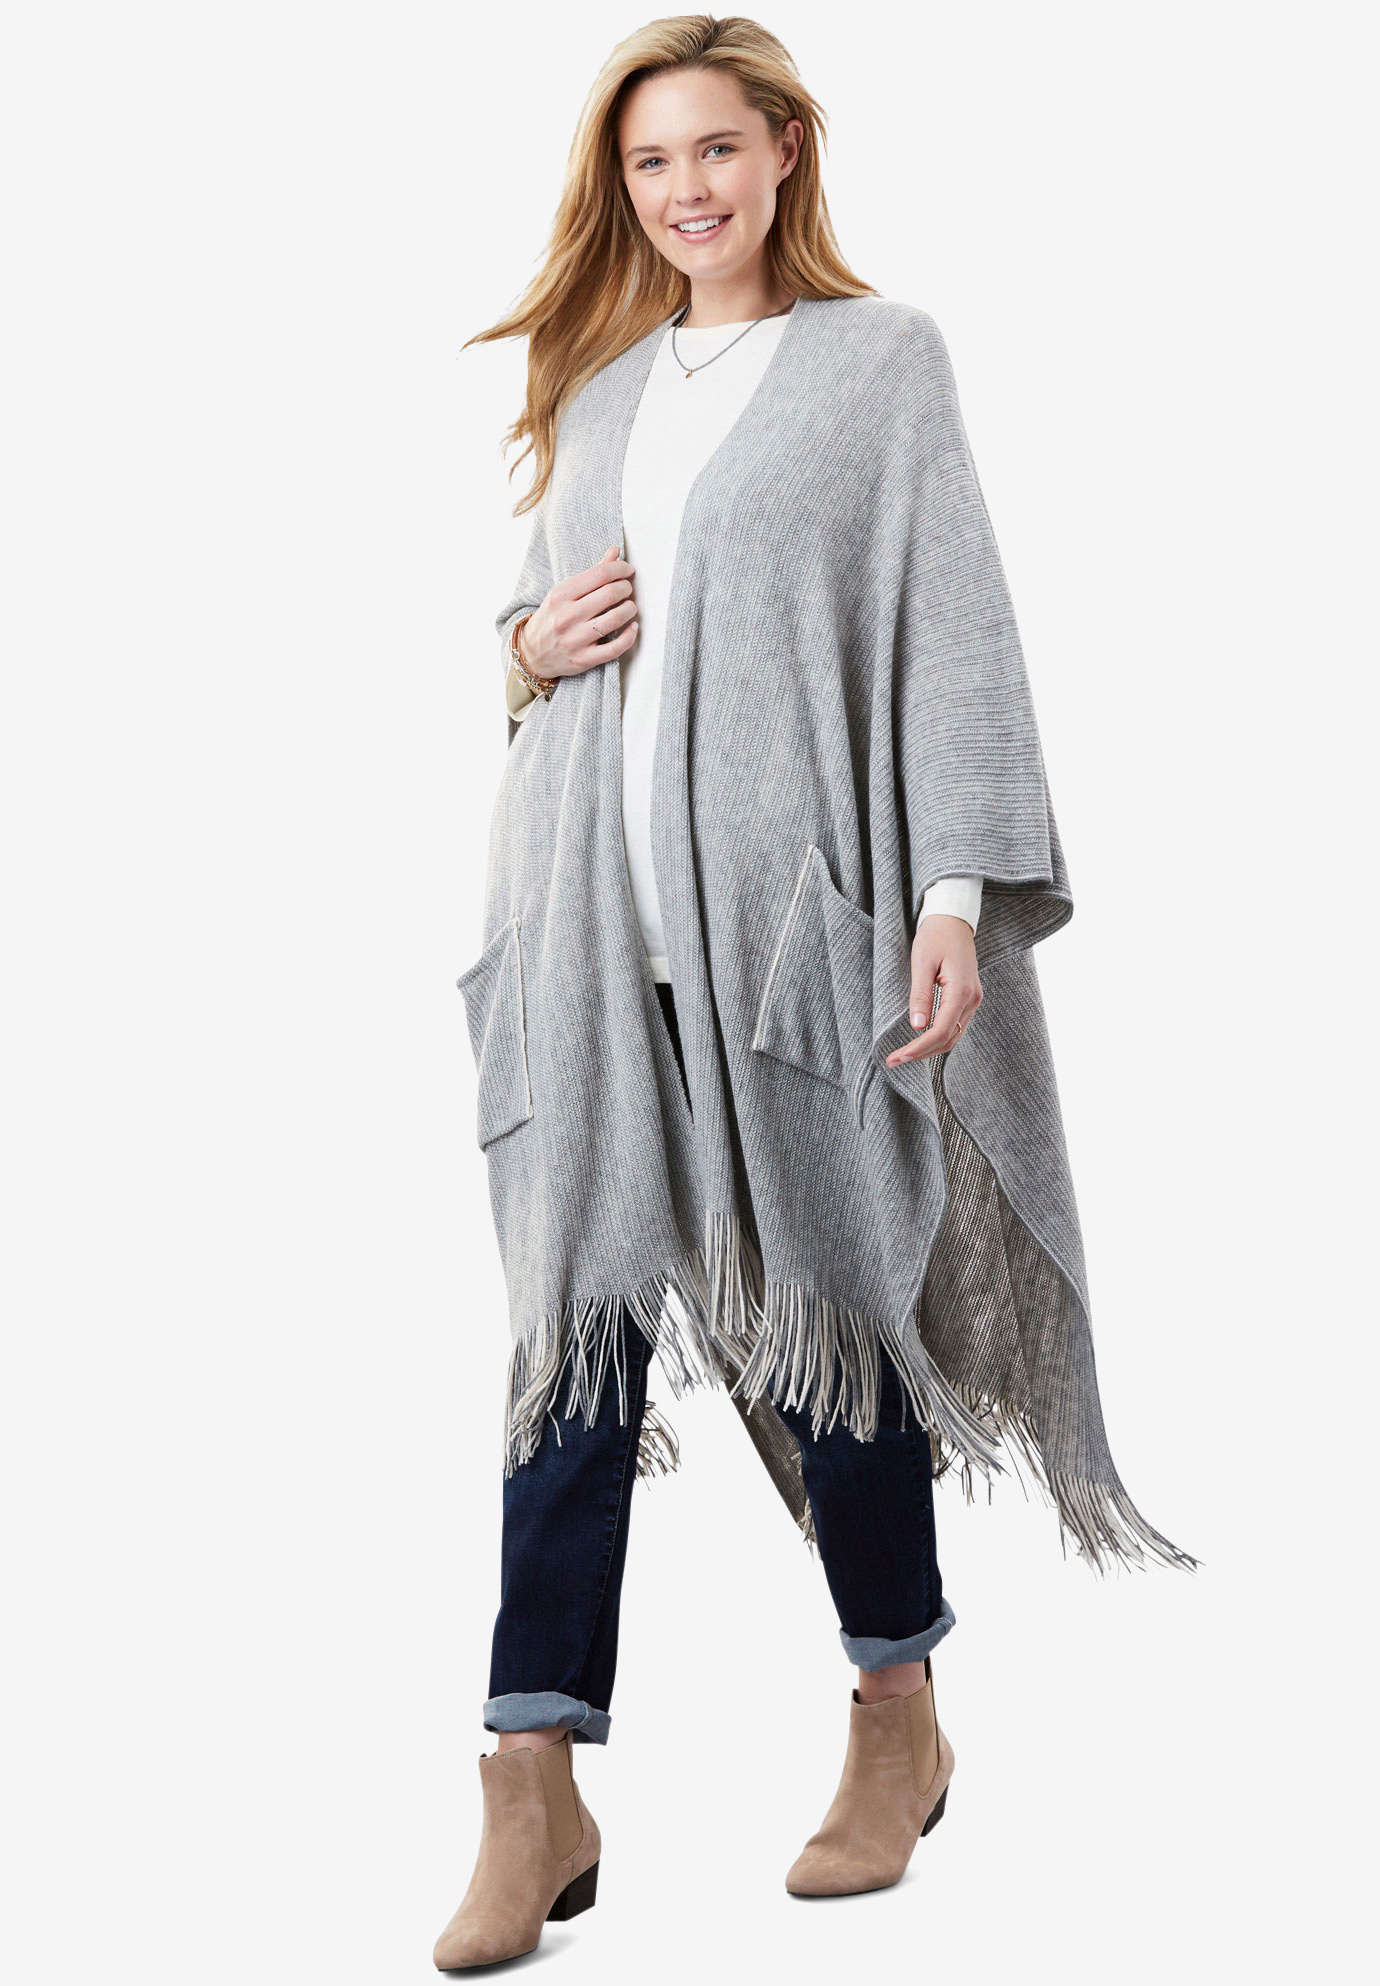 Fringed Cape | Woman Within